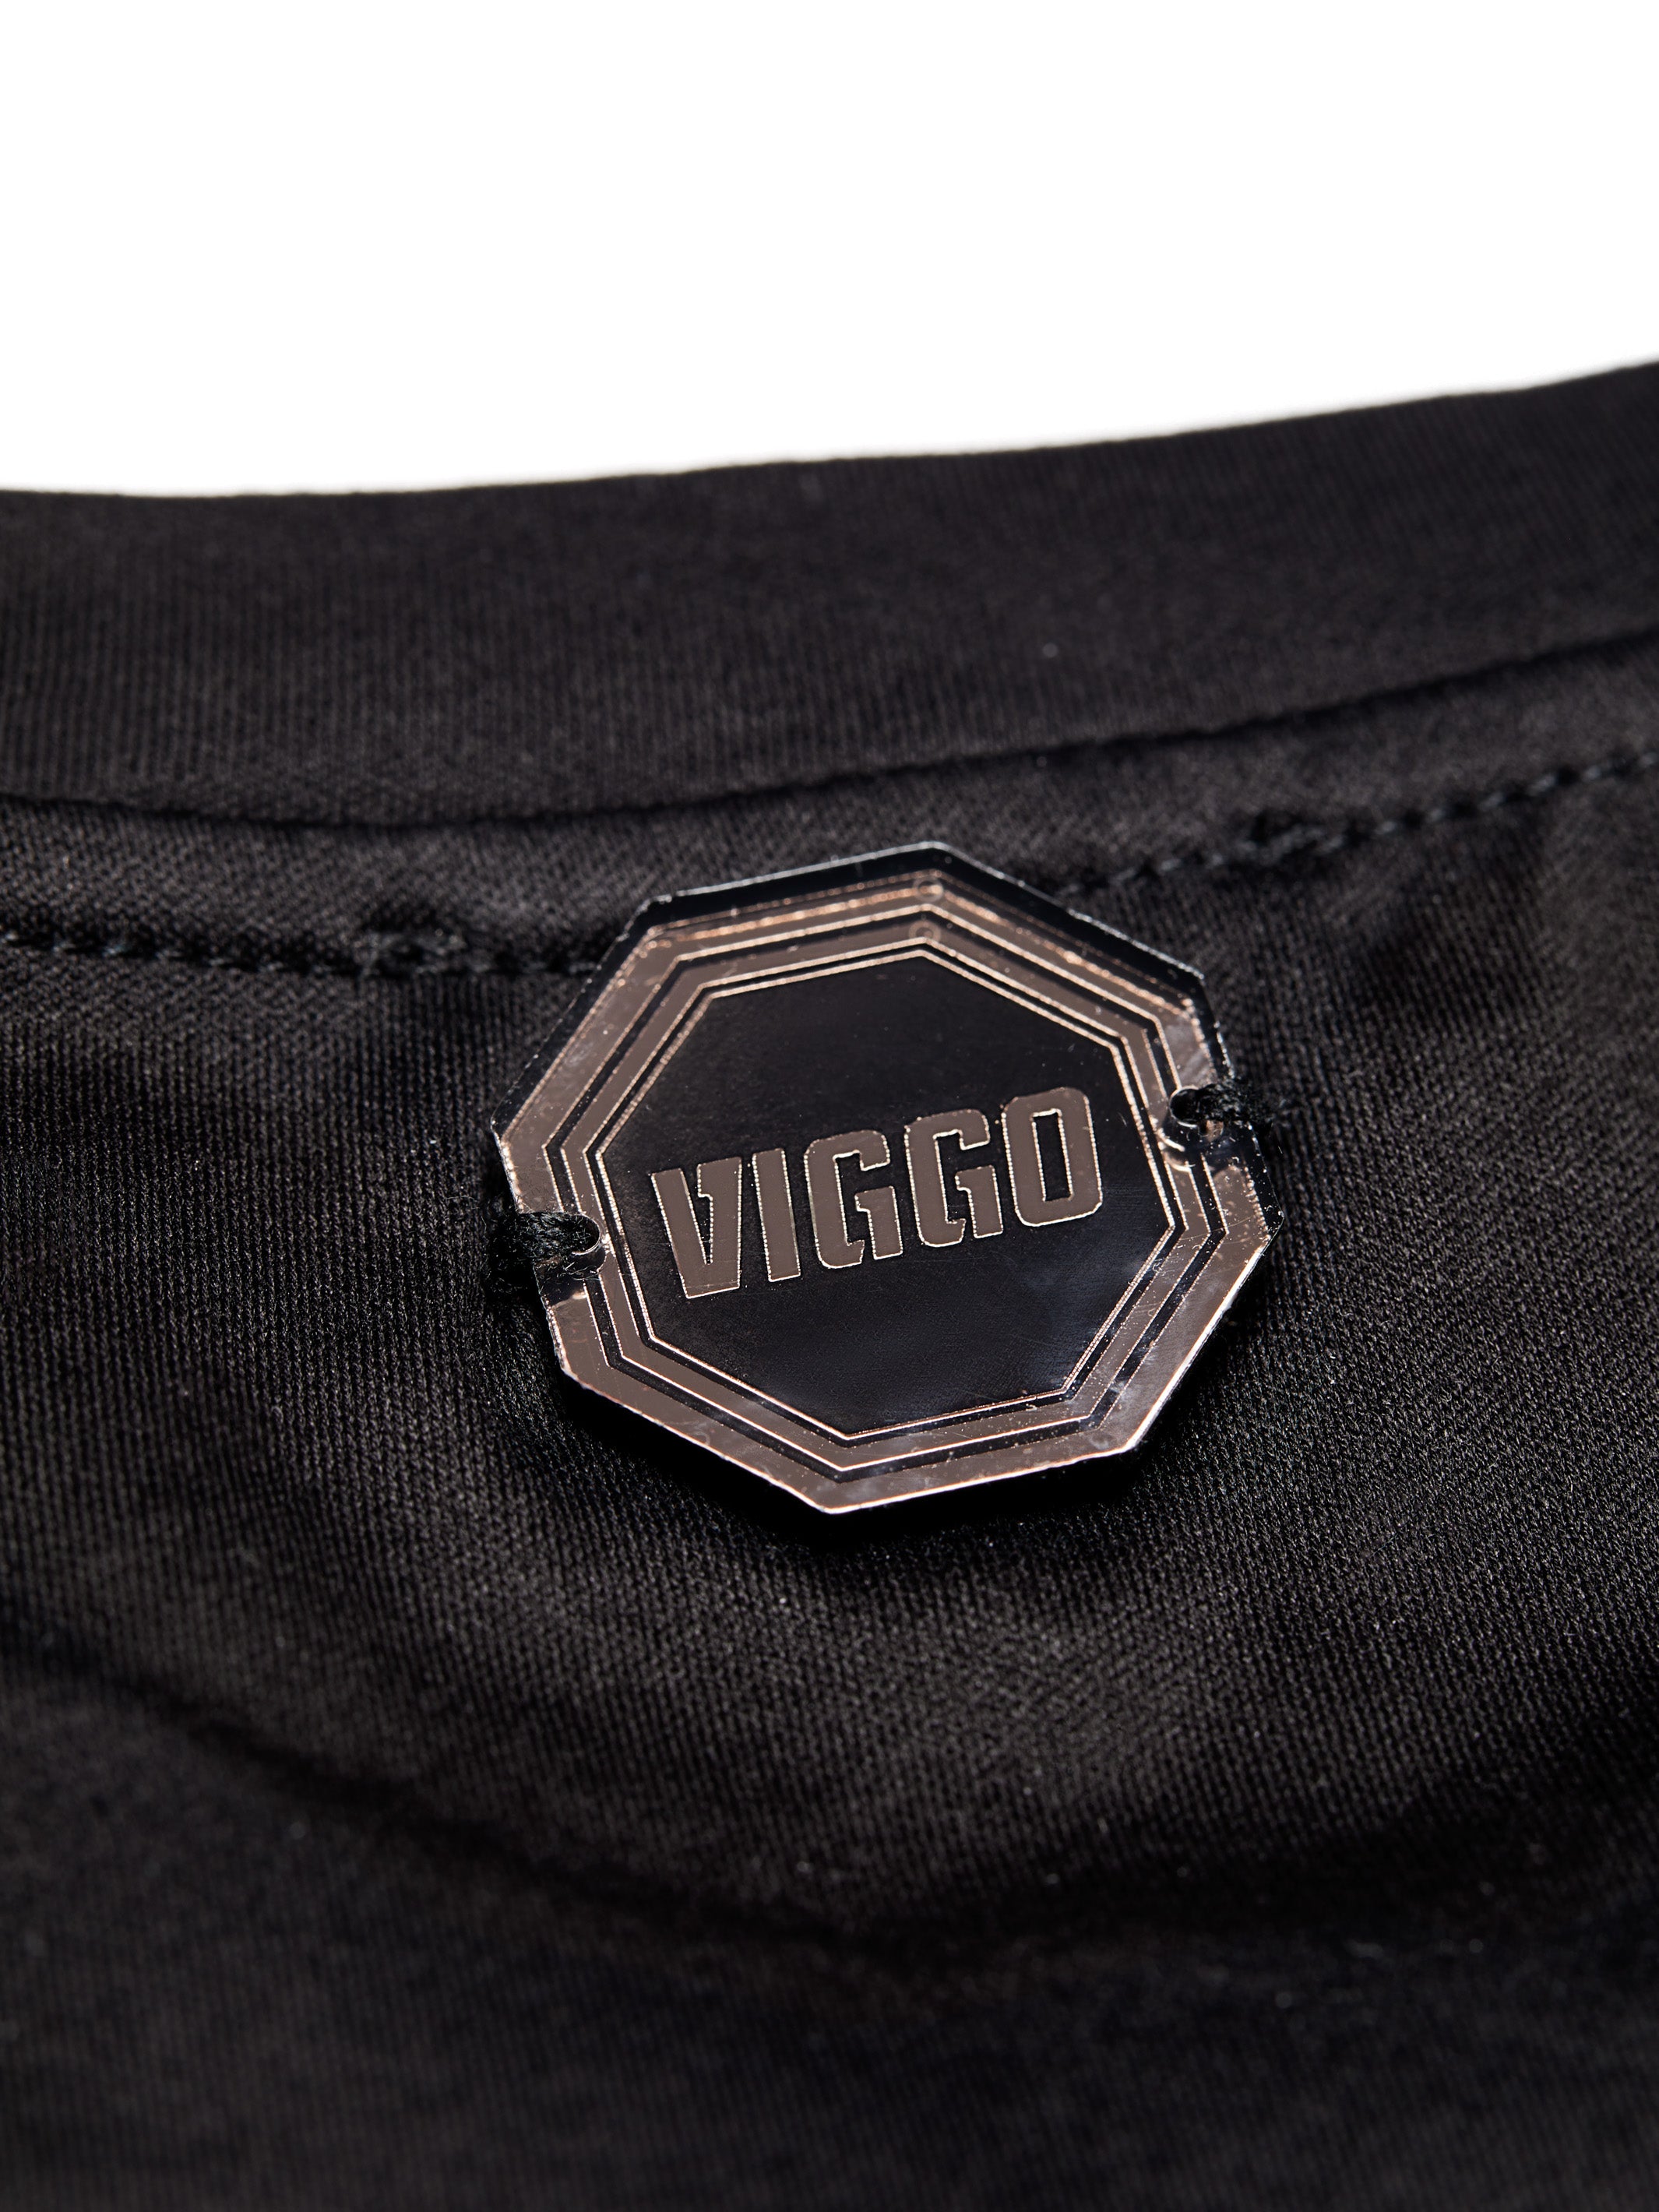 Black cotton t-shirt with octagon